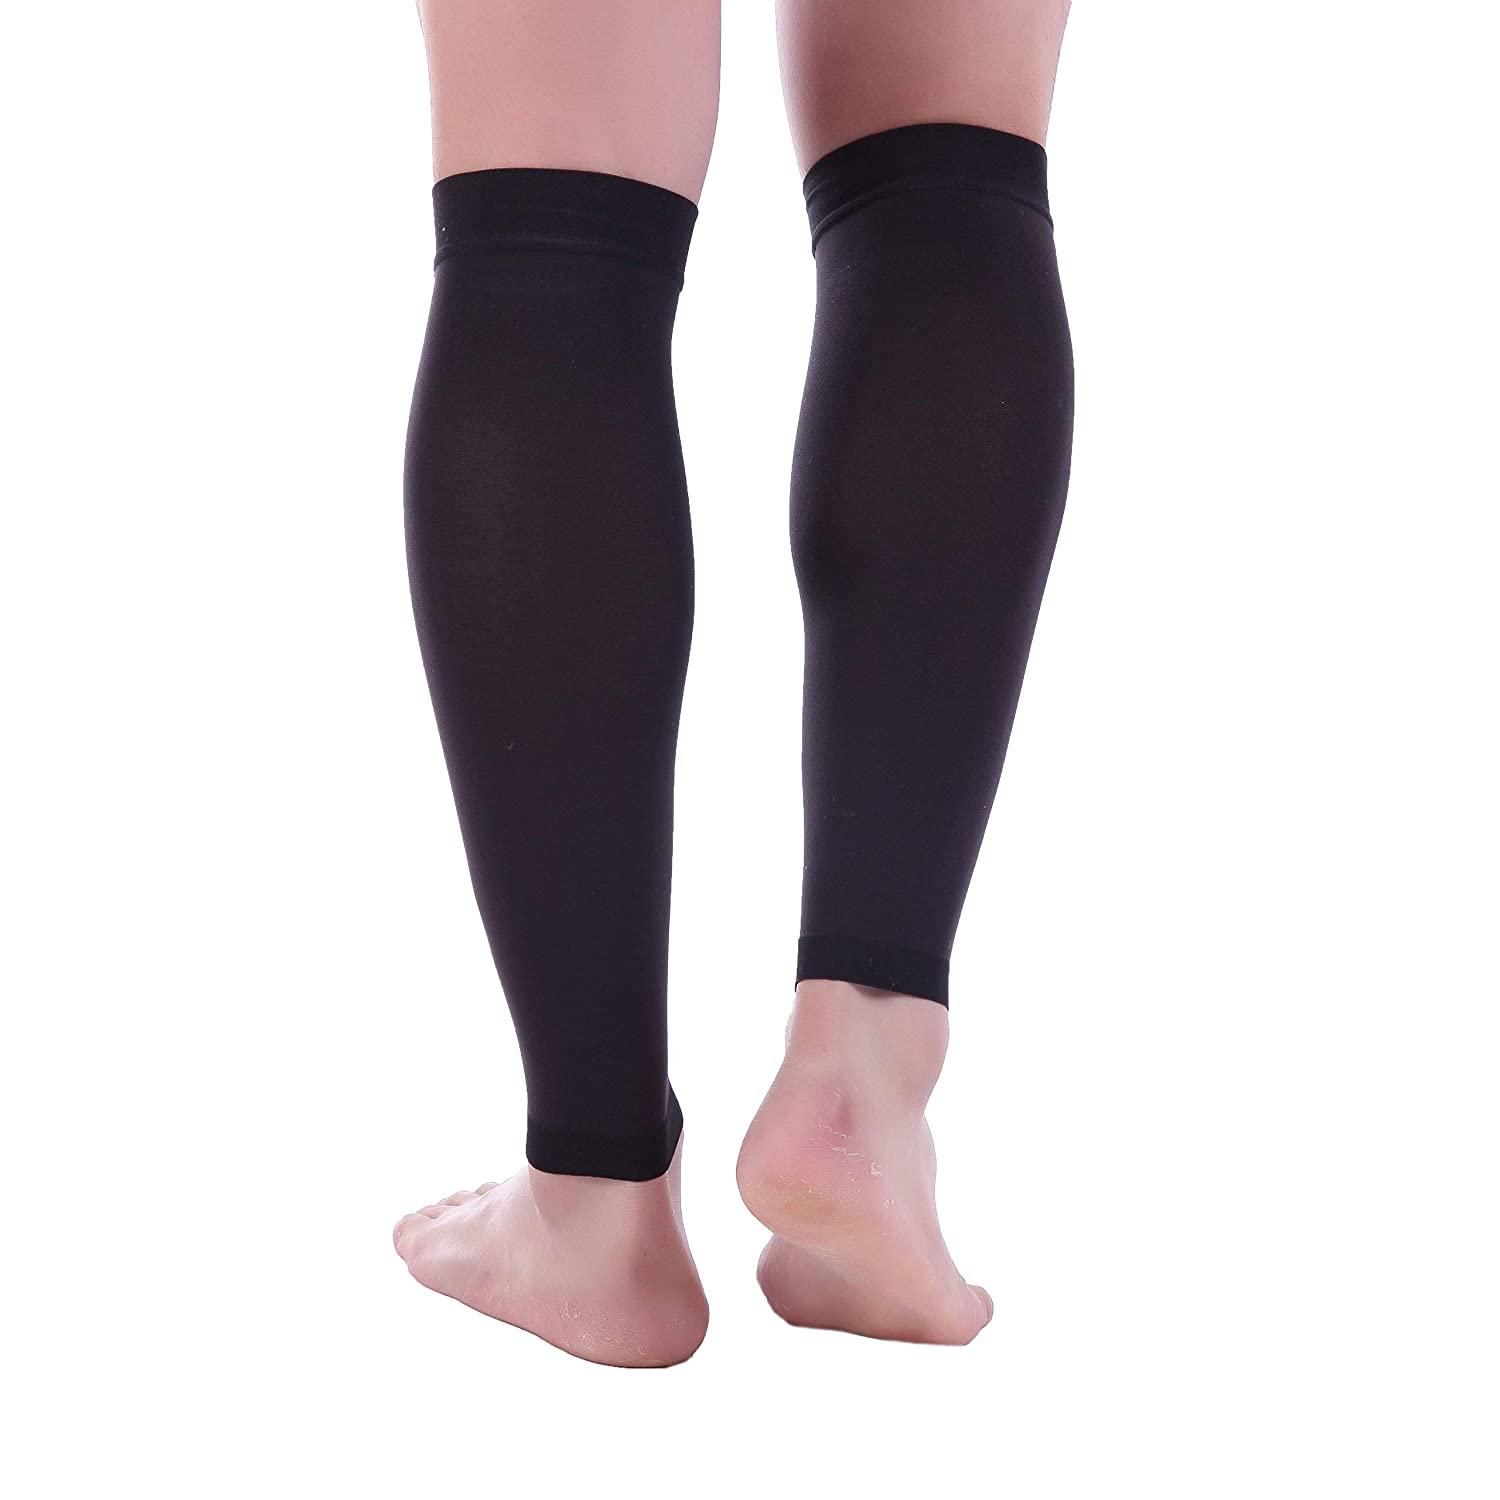  Doc Miller Calf Compression Sleeves for Short People